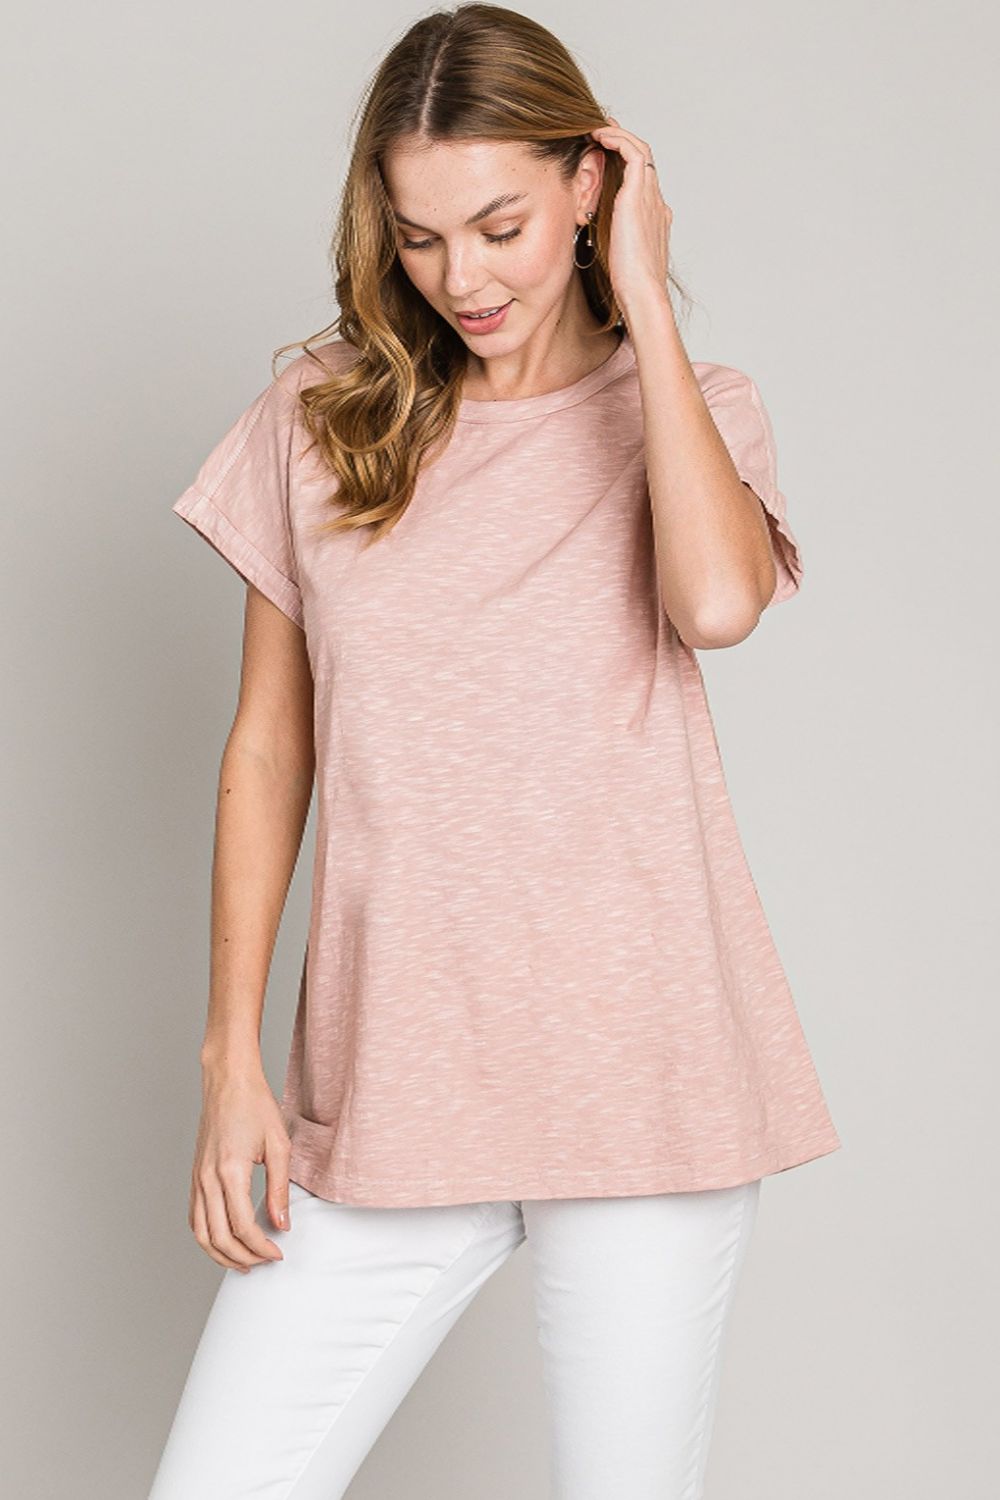 A woman in a casual, mauve cotton t-shirt, paired with white pants for a relaxed and stylish everyday look.